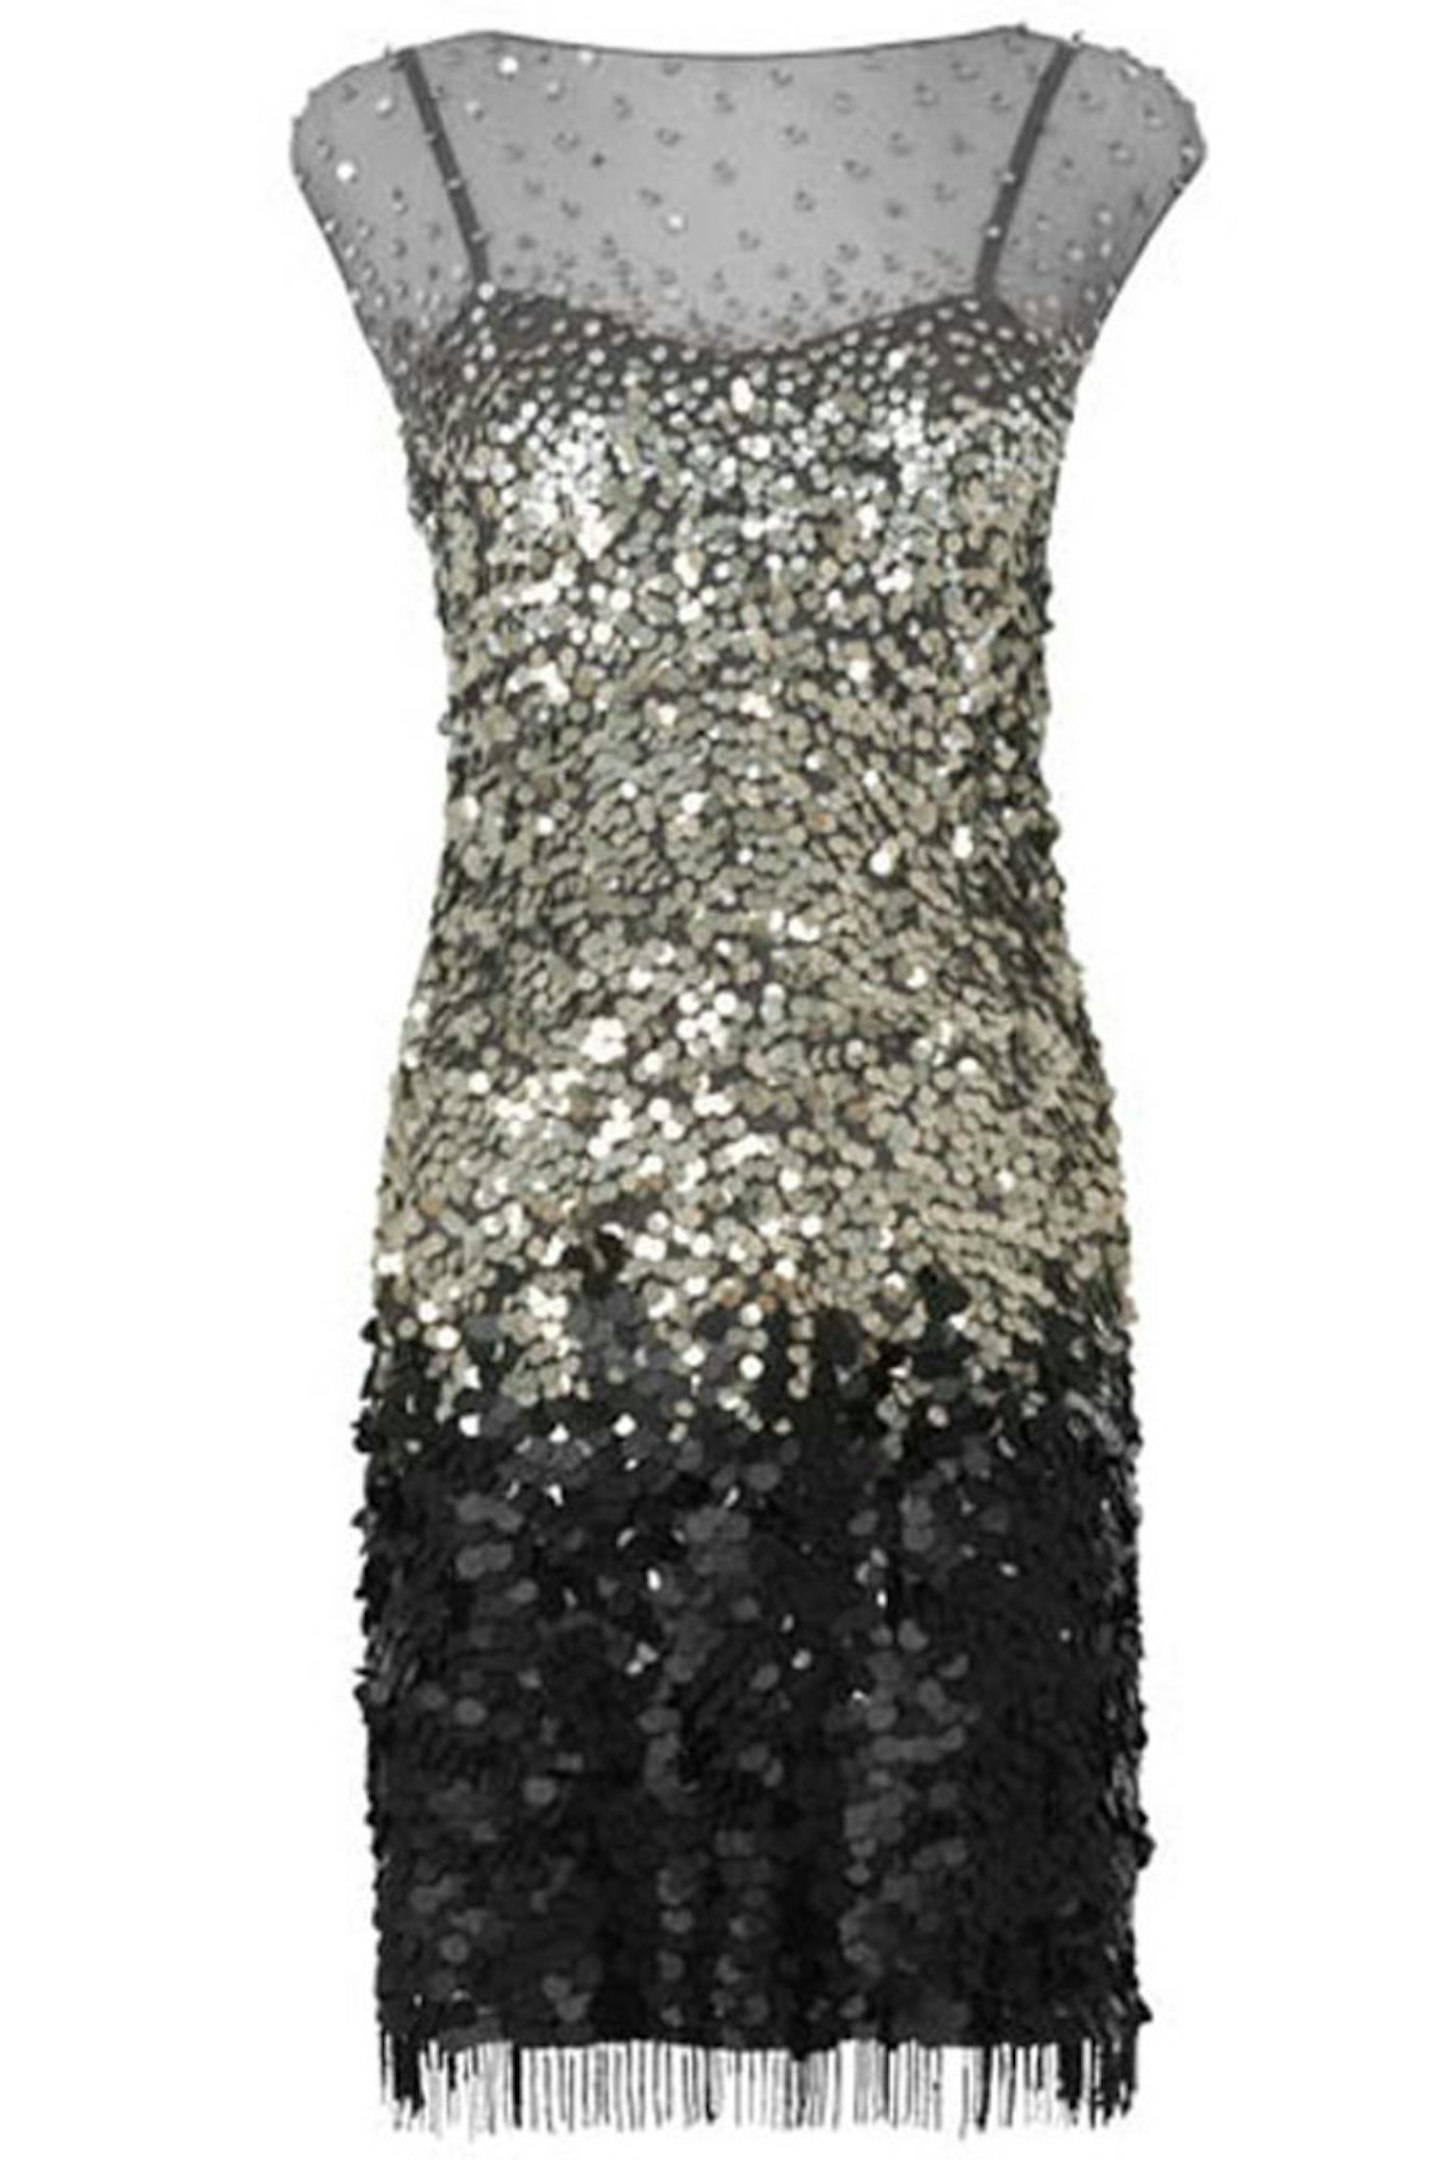 Silver and metal grey sequinned dress with fringe detailing, £225, Phase Eight